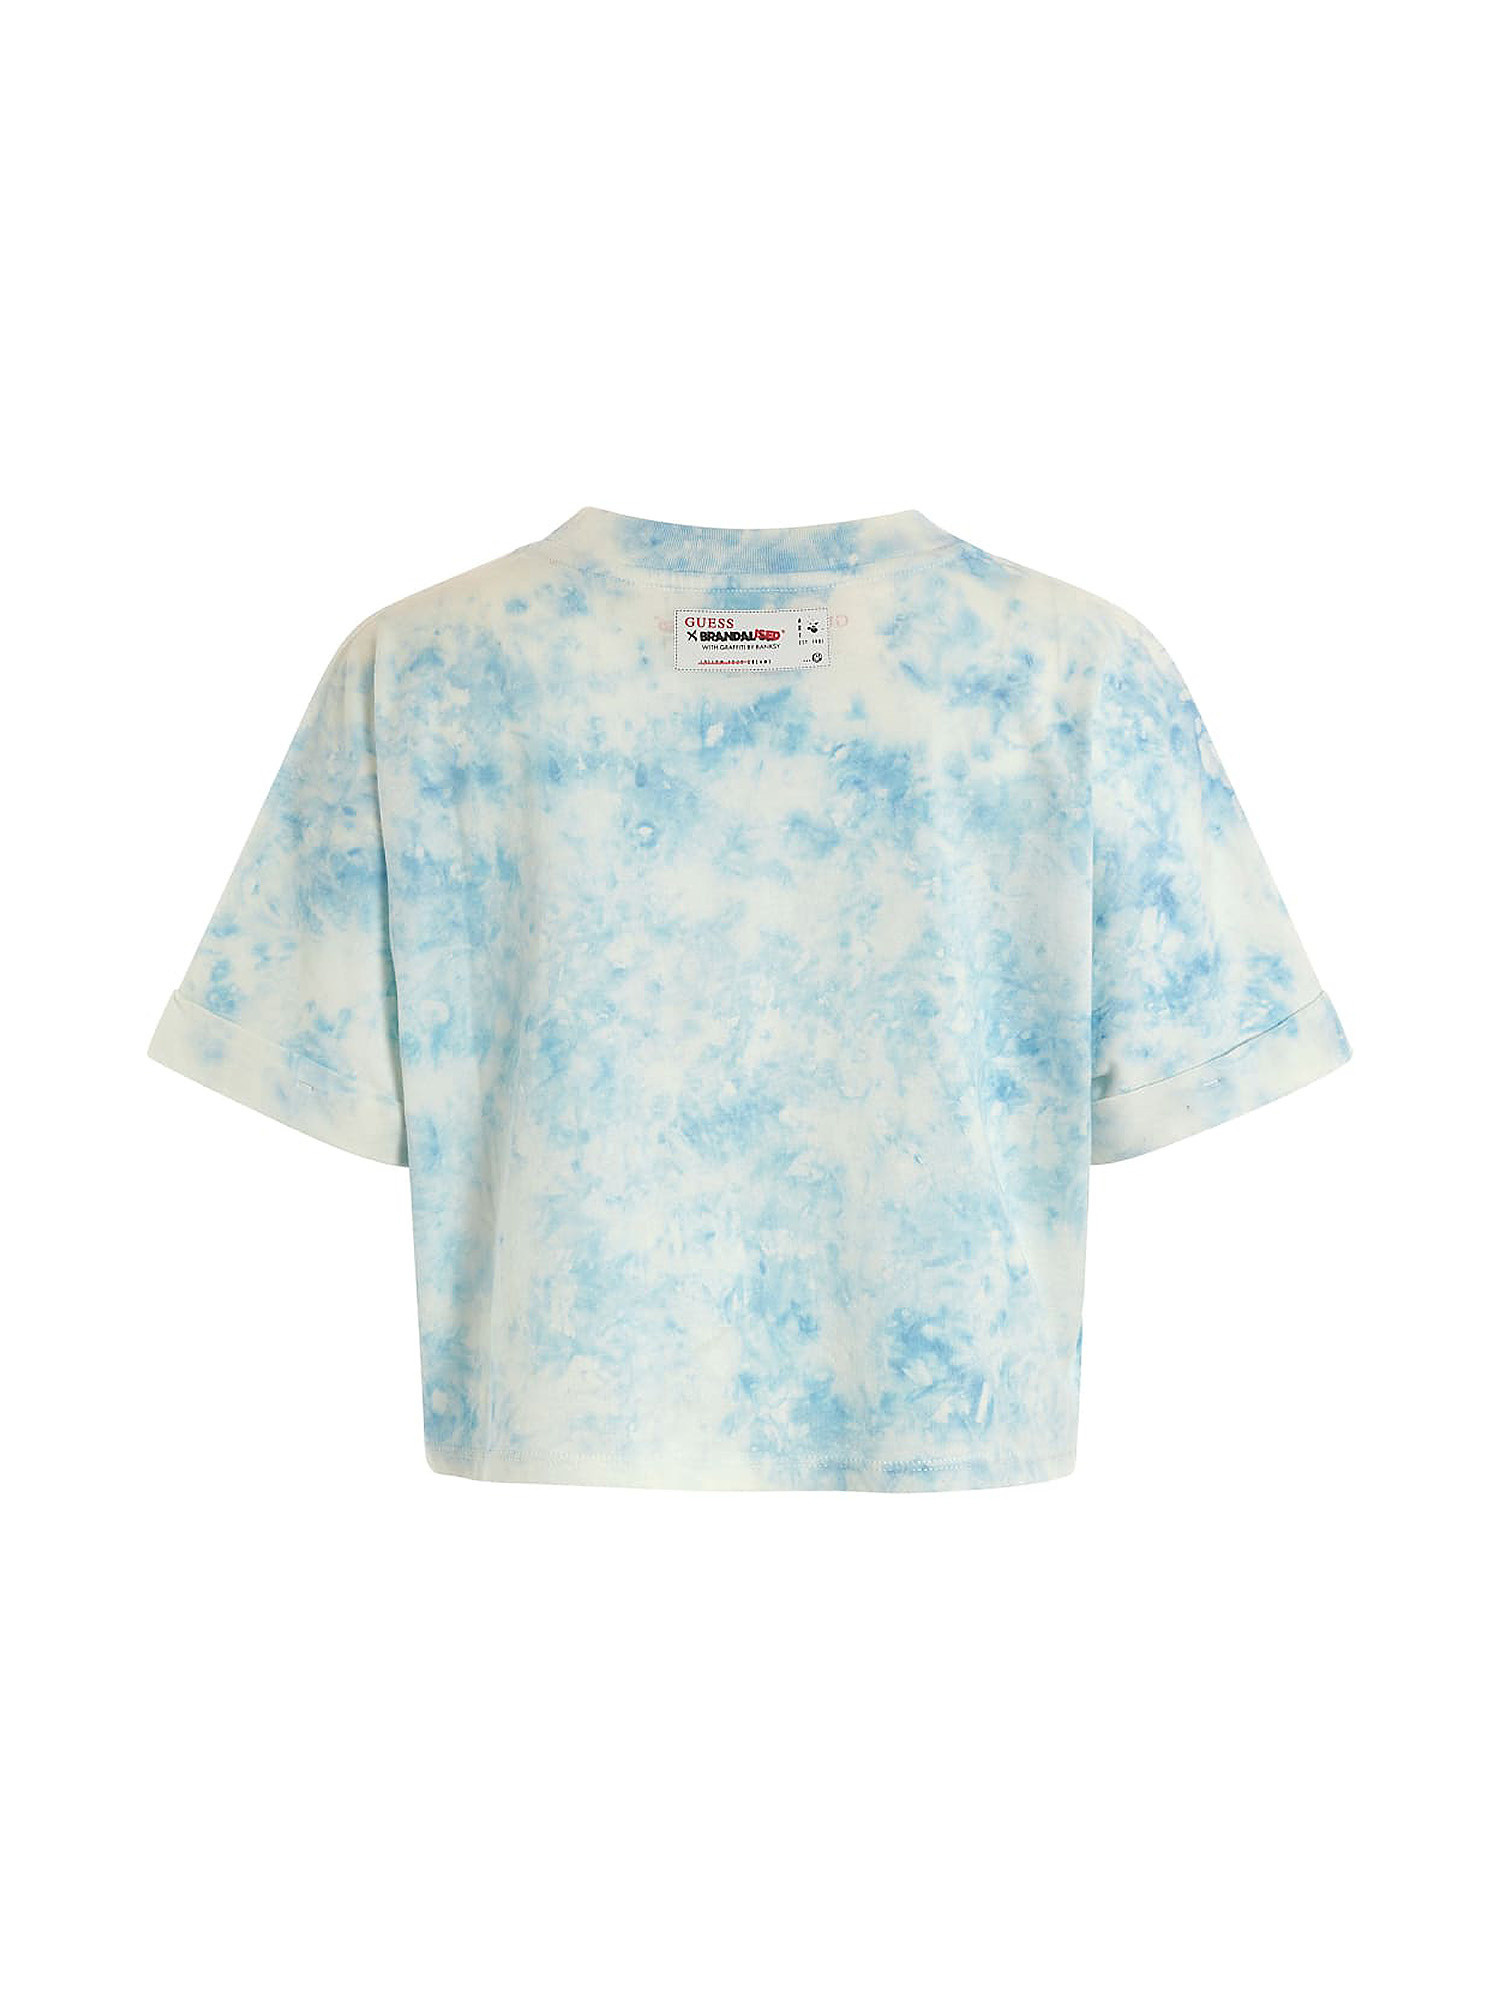 GUESS - Tie-dye T-shirt, Light Blue, large image number 1